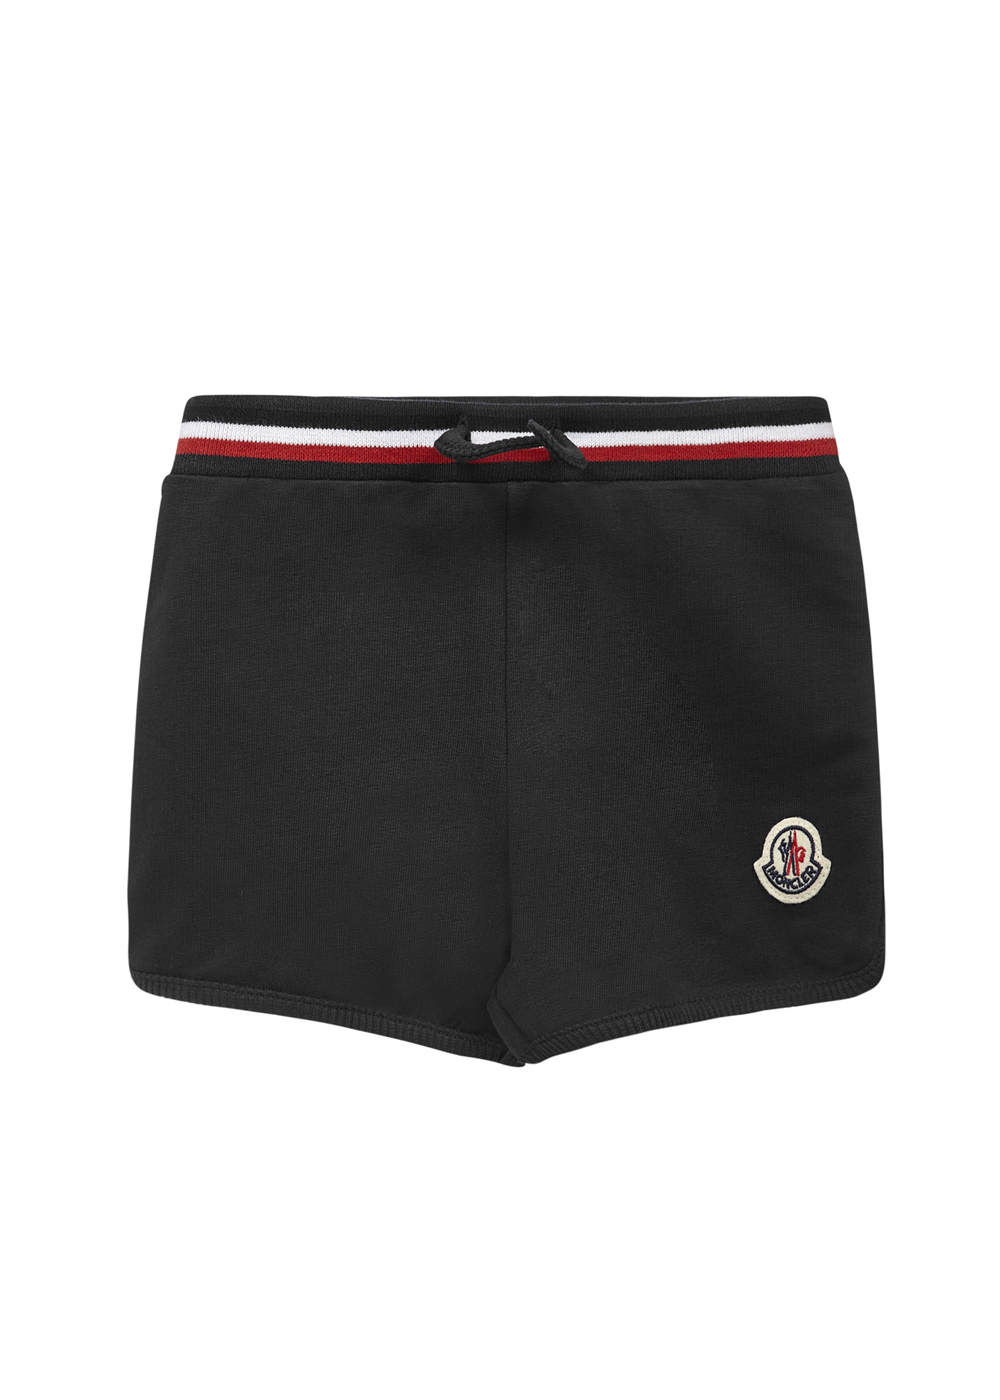 Featured image for “Moncler Shorts neonato”